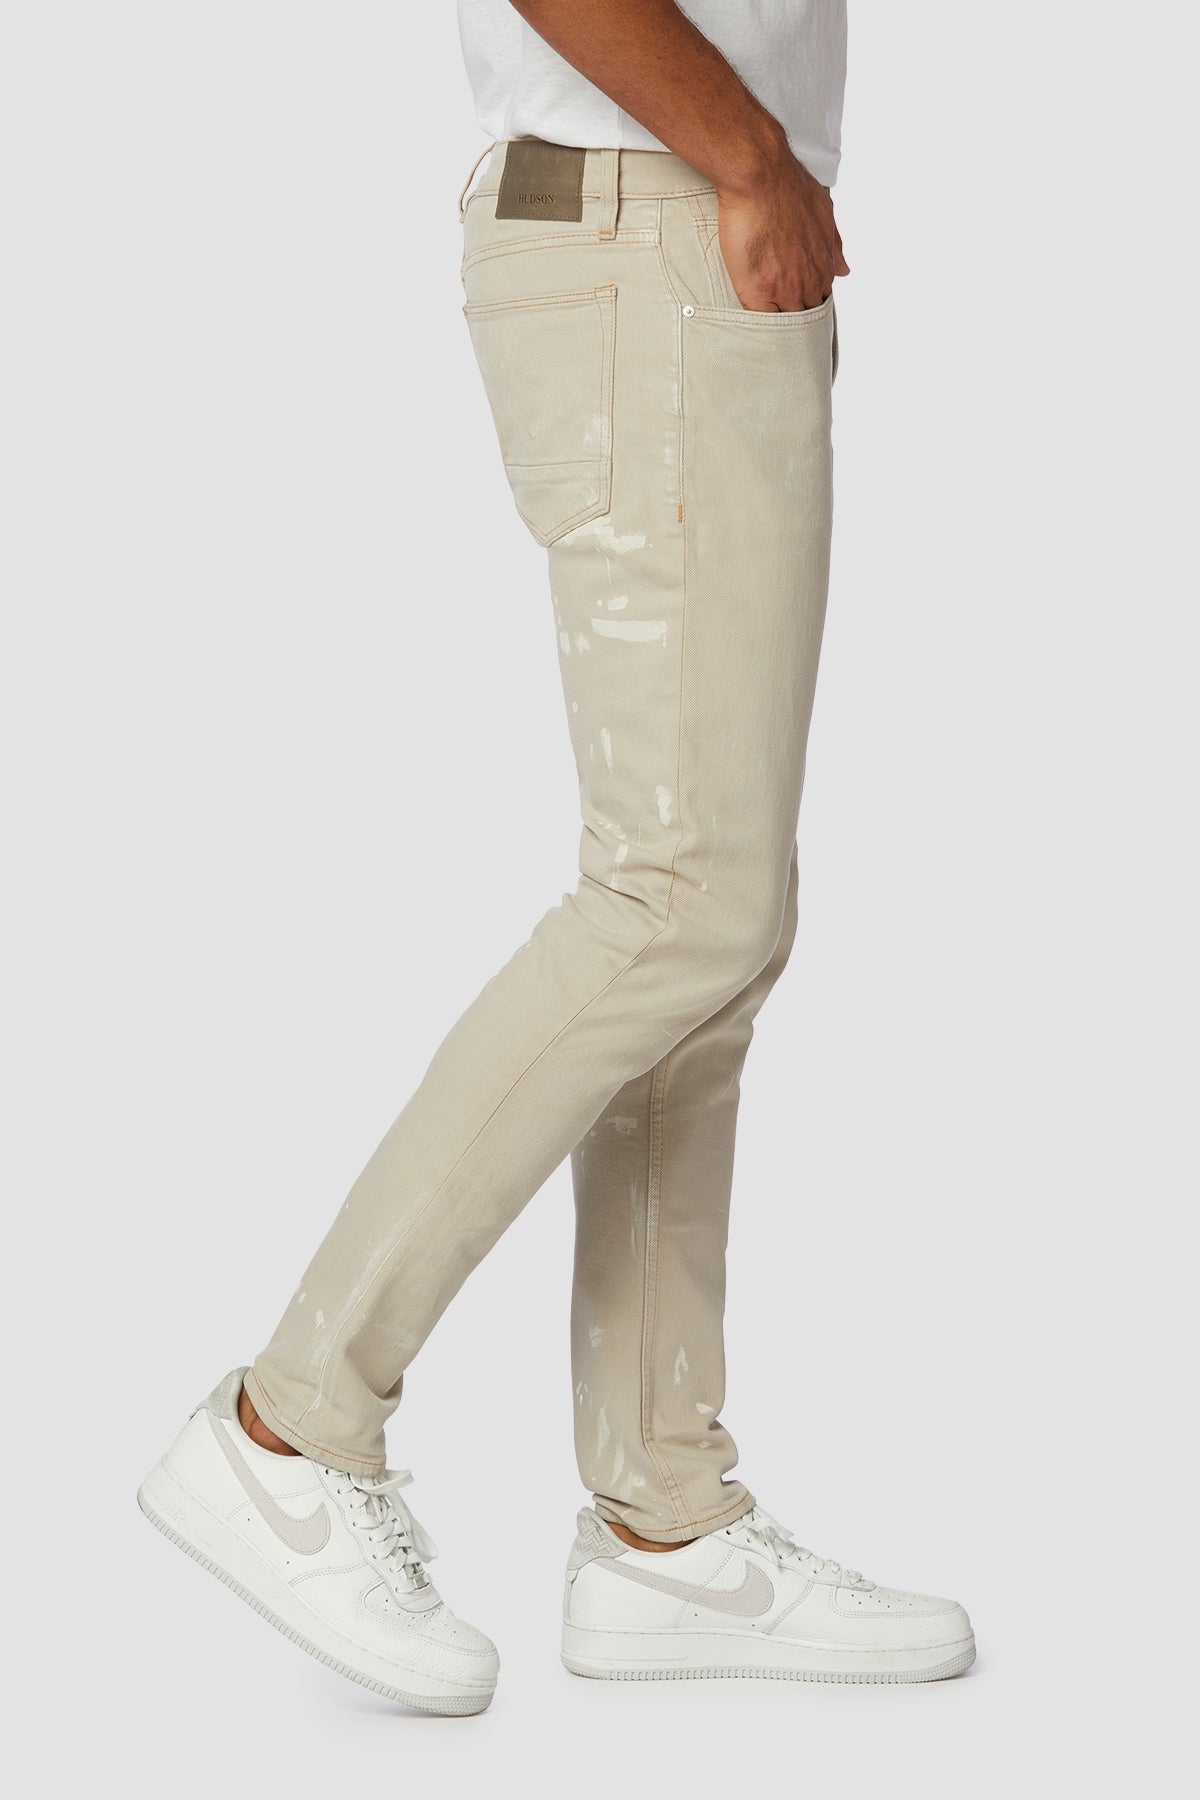 Shop to find Zack Jean Hudson Jeans , shop our online store today